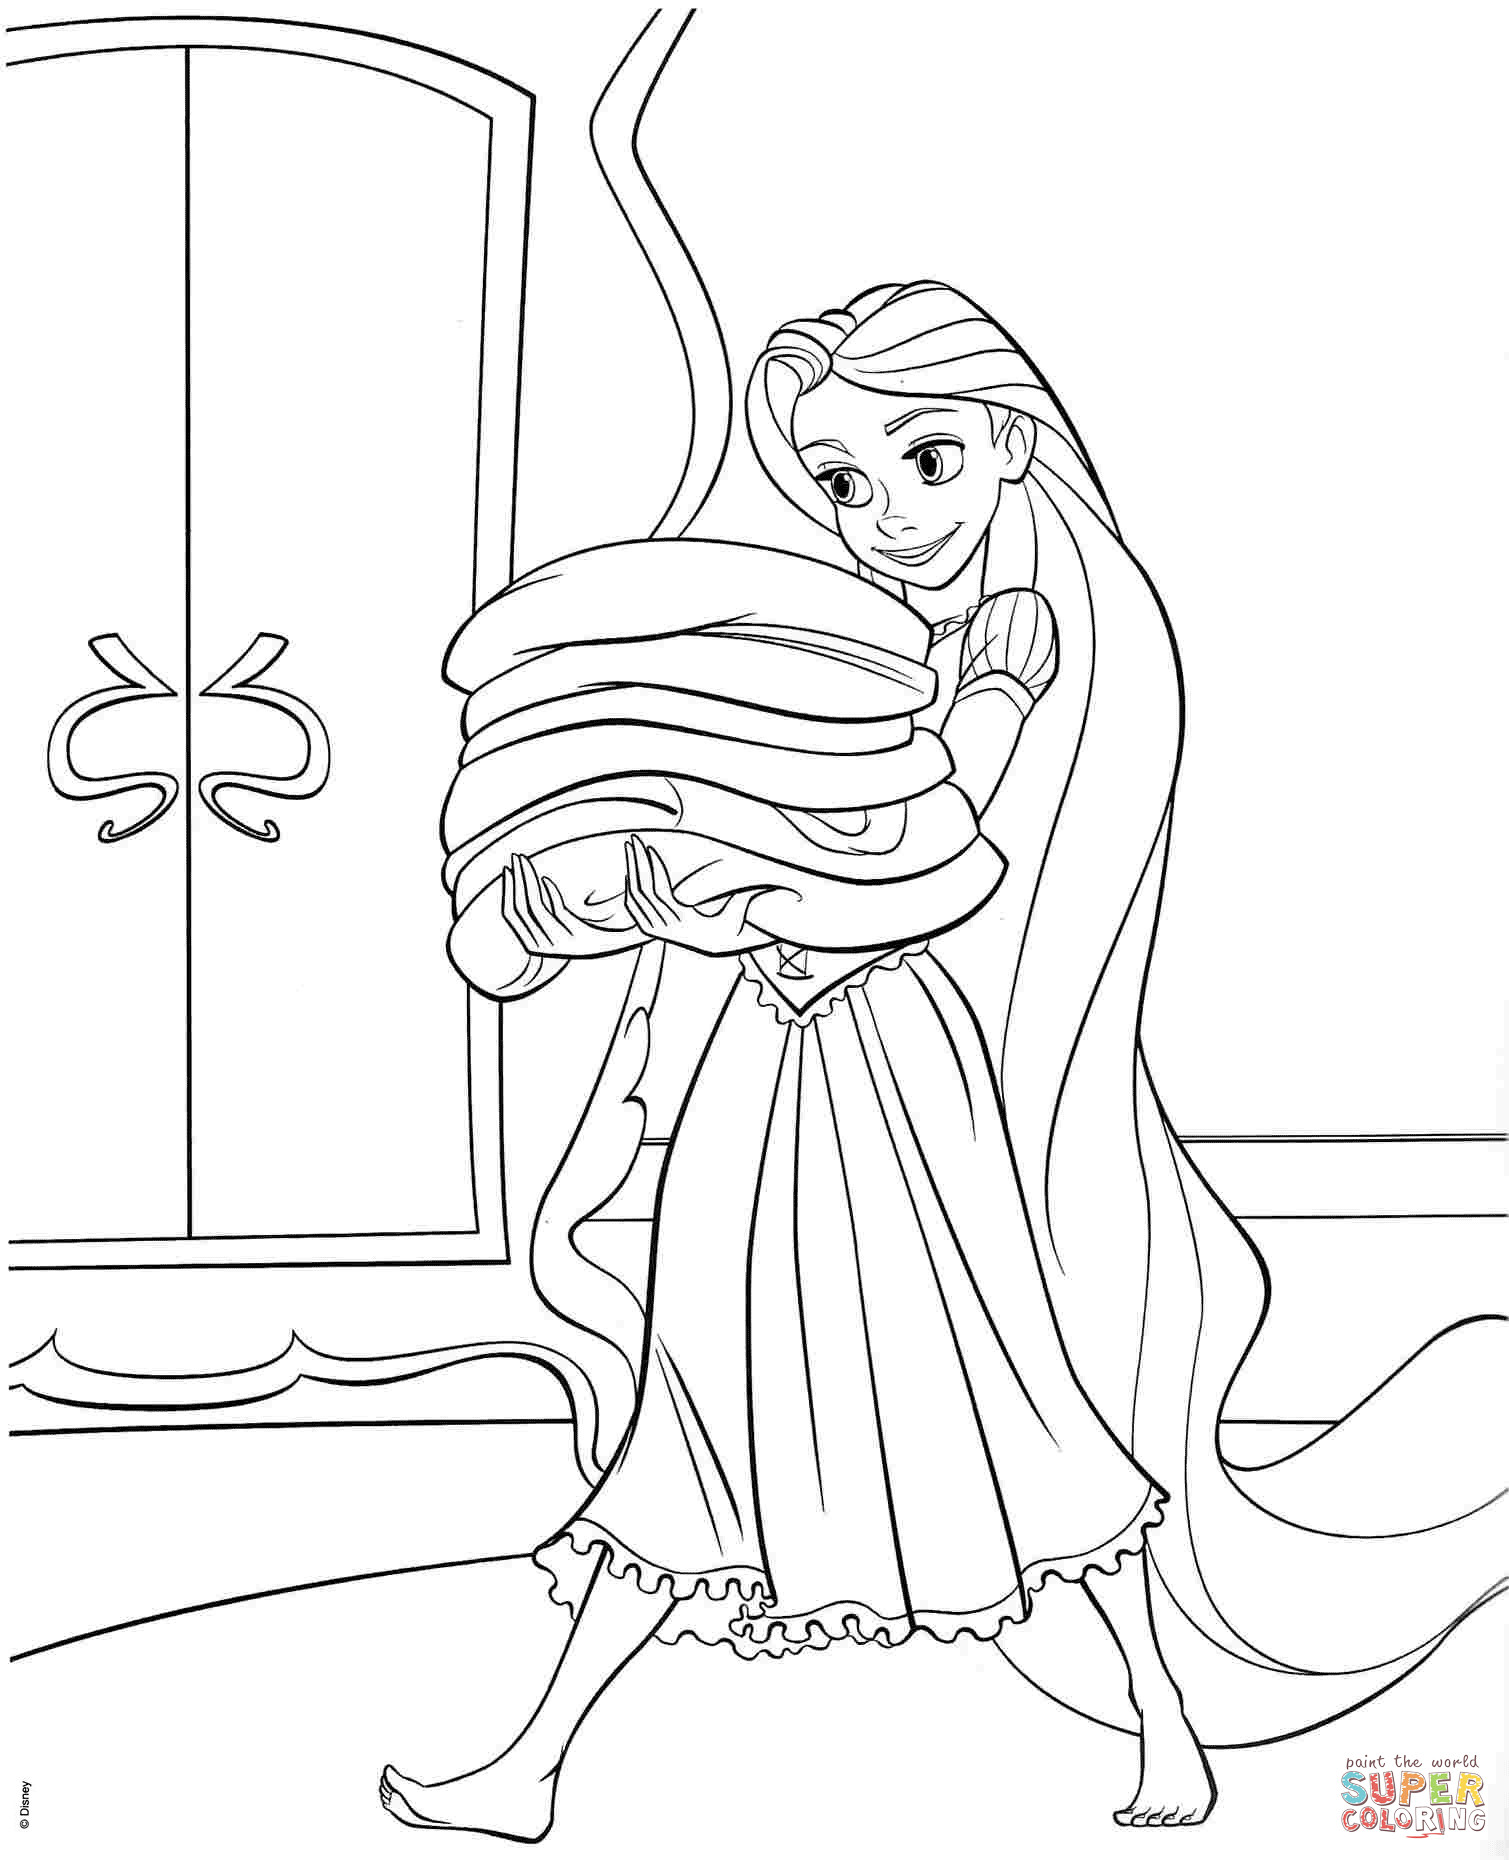 Disney Rapunzel Coloring Pages For Toddlers
 Tangled Rapunzel coloring page